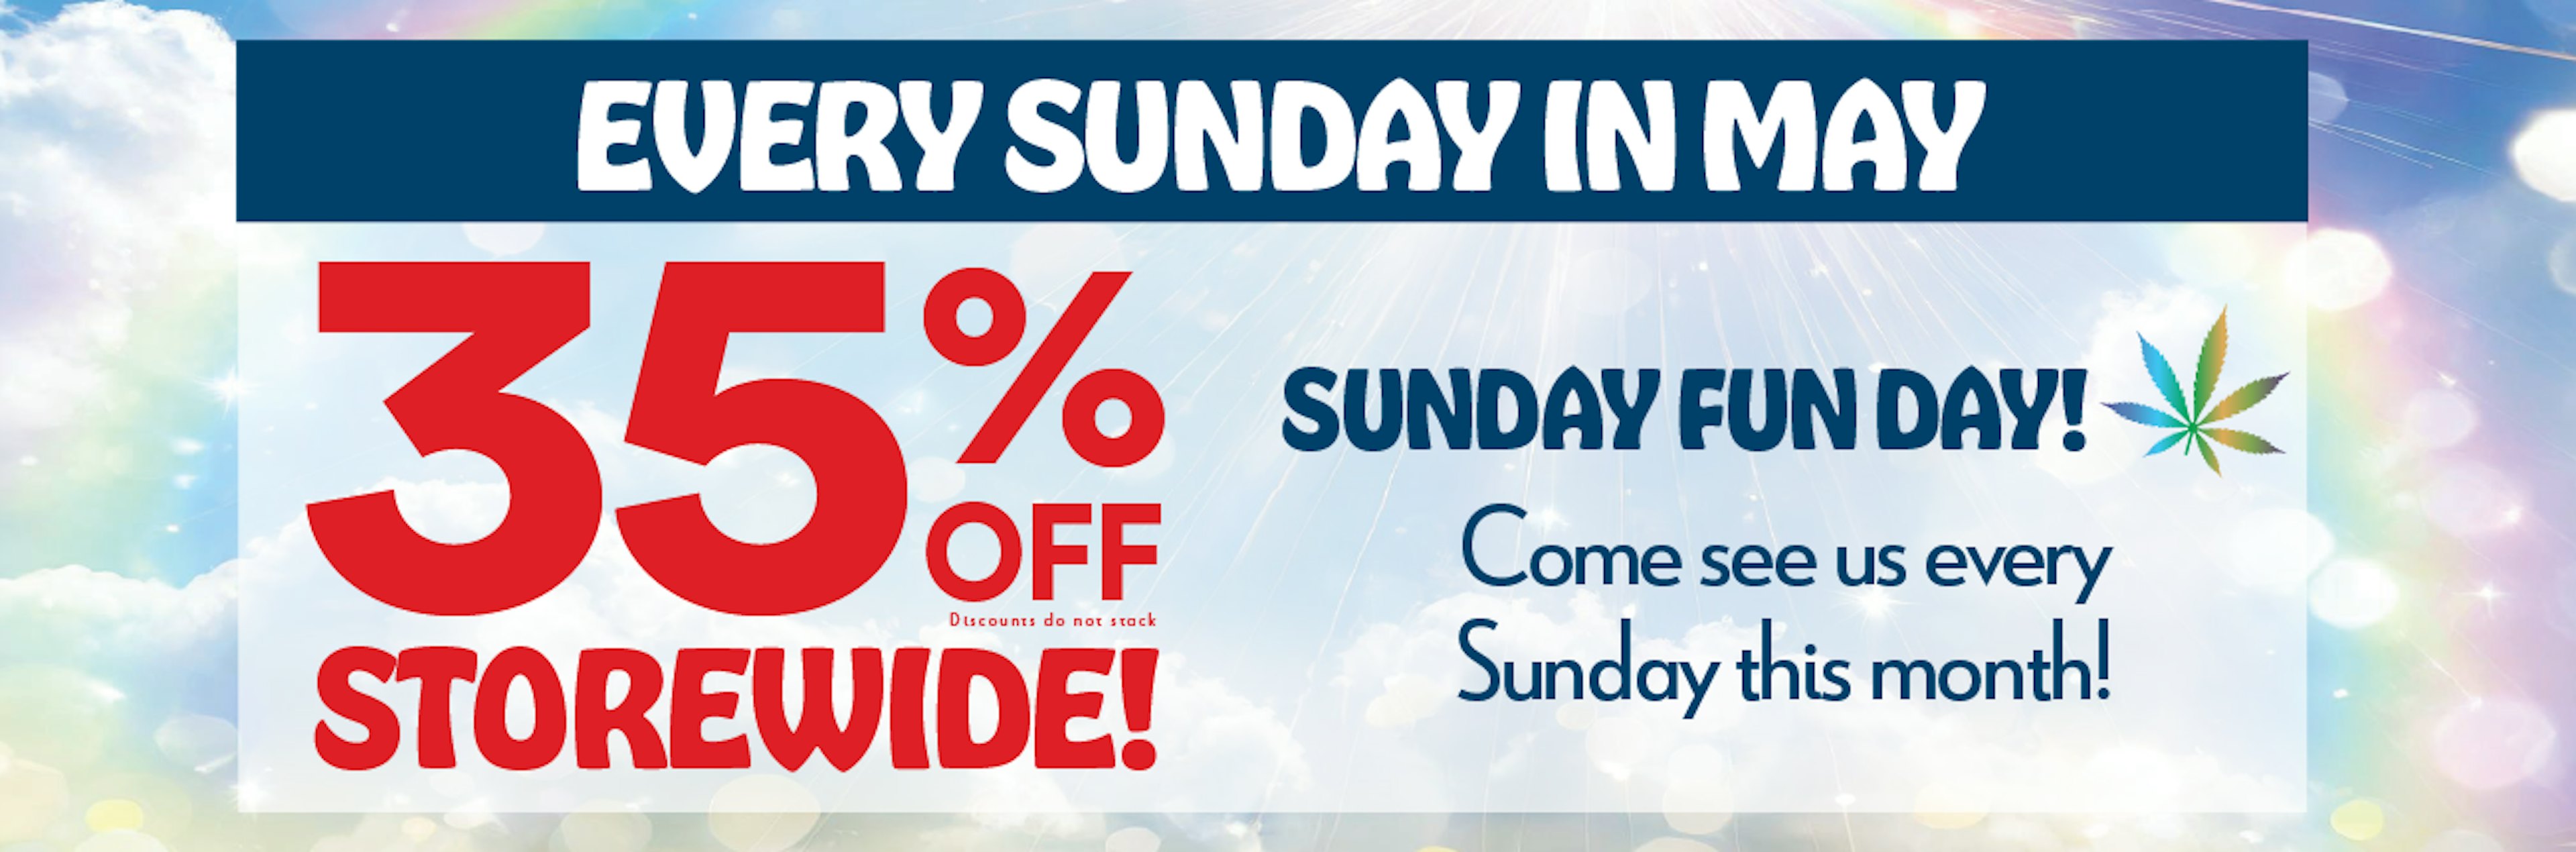 Every Sunday in May, take 35% off store wide!